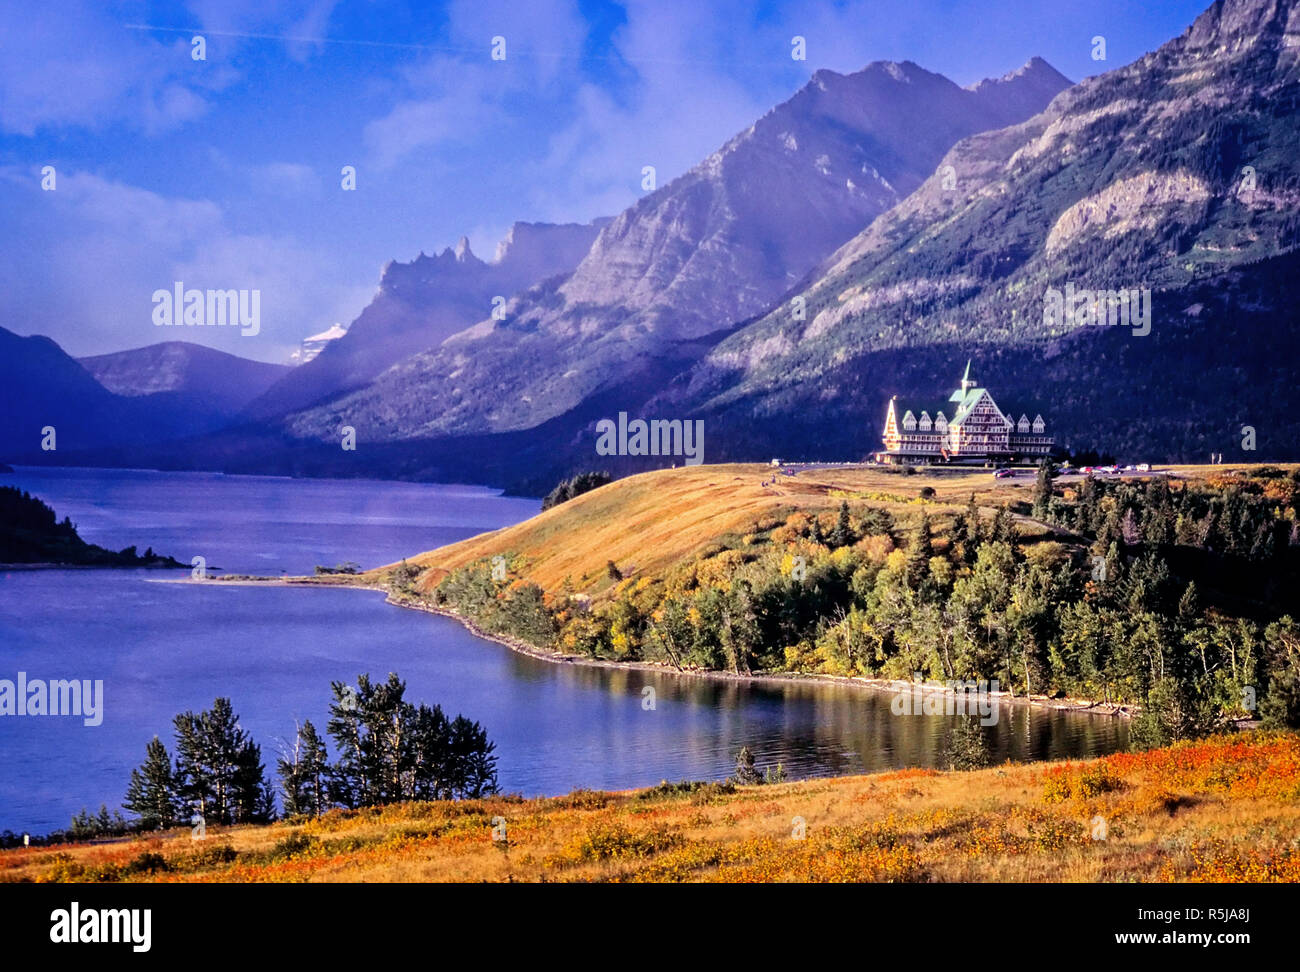 The Prince of Wales Hotel located in Waterton Lakes National Park was opened in 1927. Alberta. Canada. Stock Photo